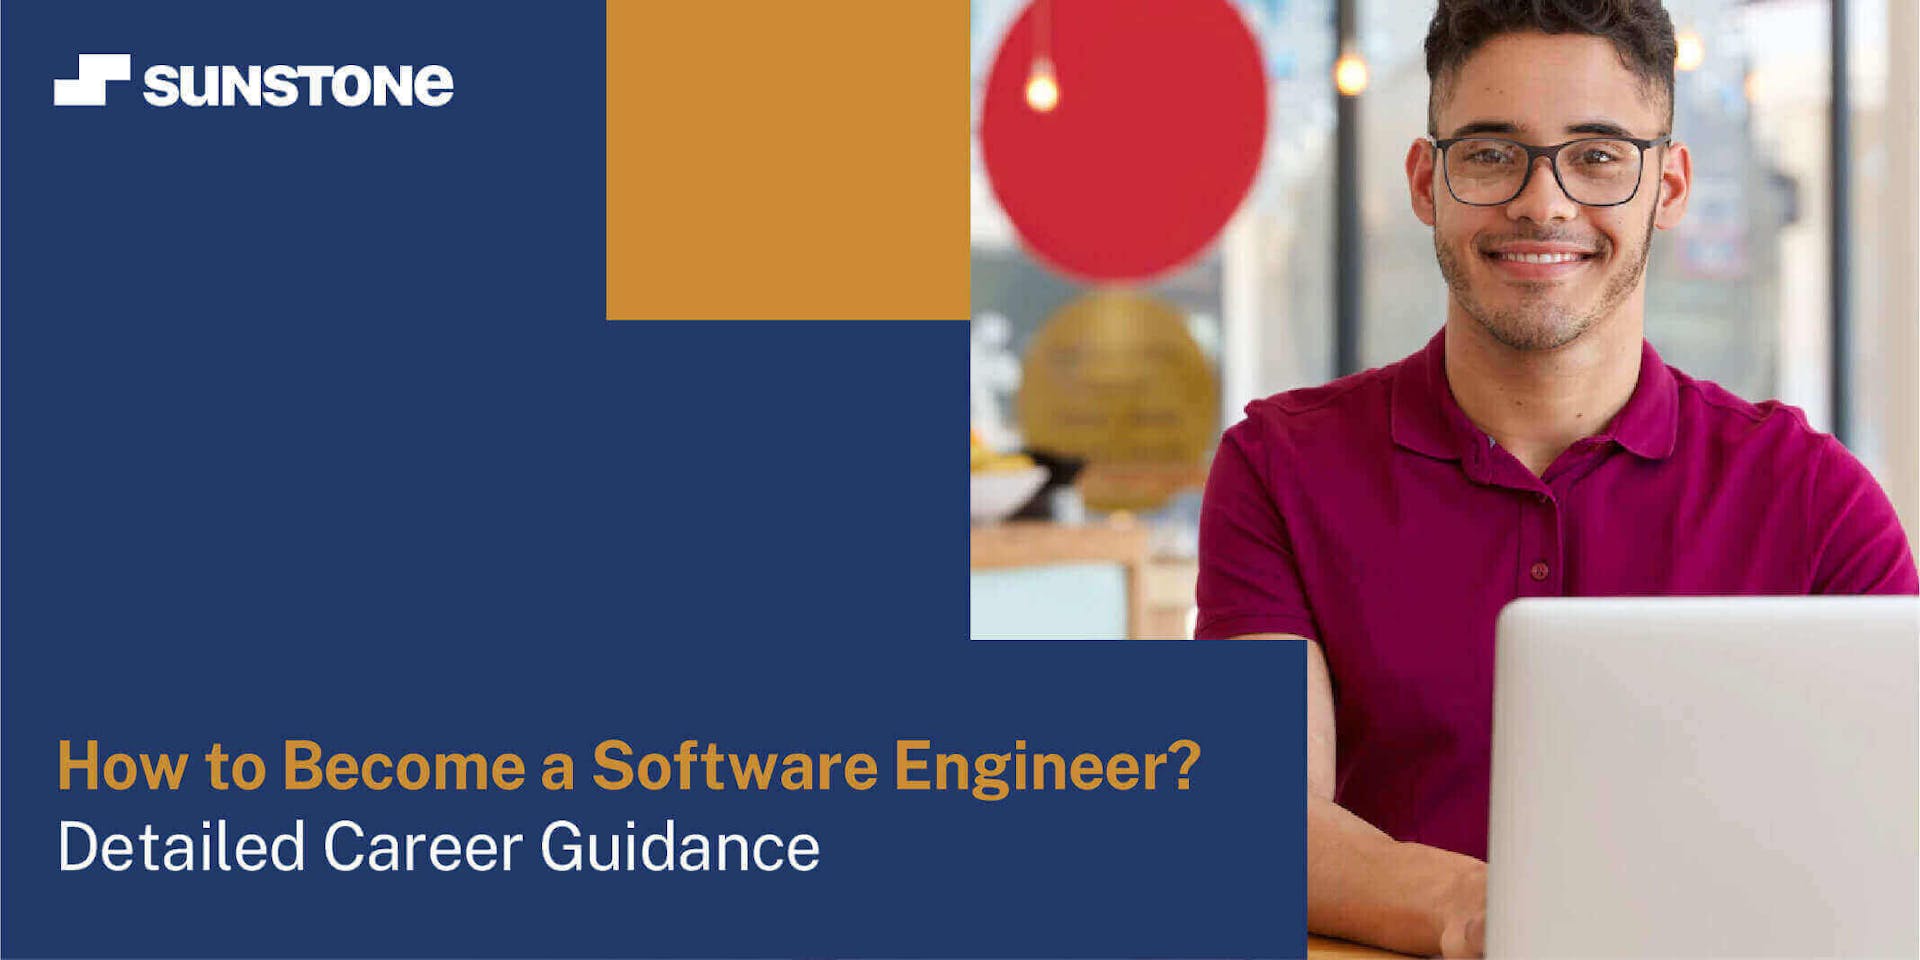 How to Become a Software Engineer? Detailed Career Guidance